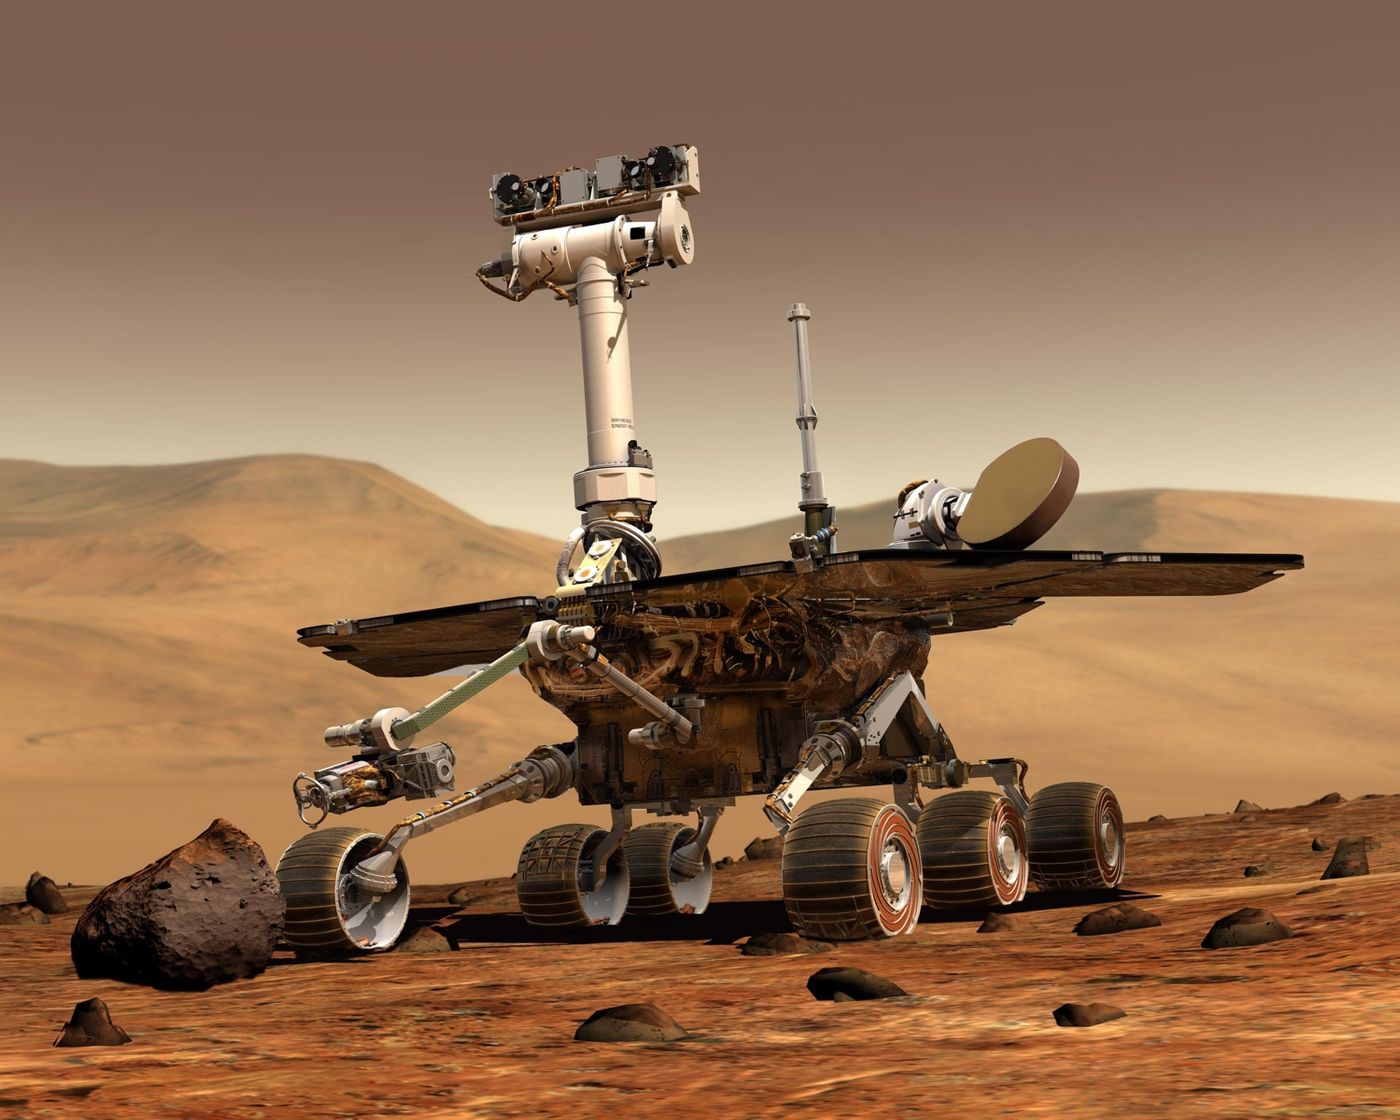 An artist's rendition of the Opportunity rover on Mars.